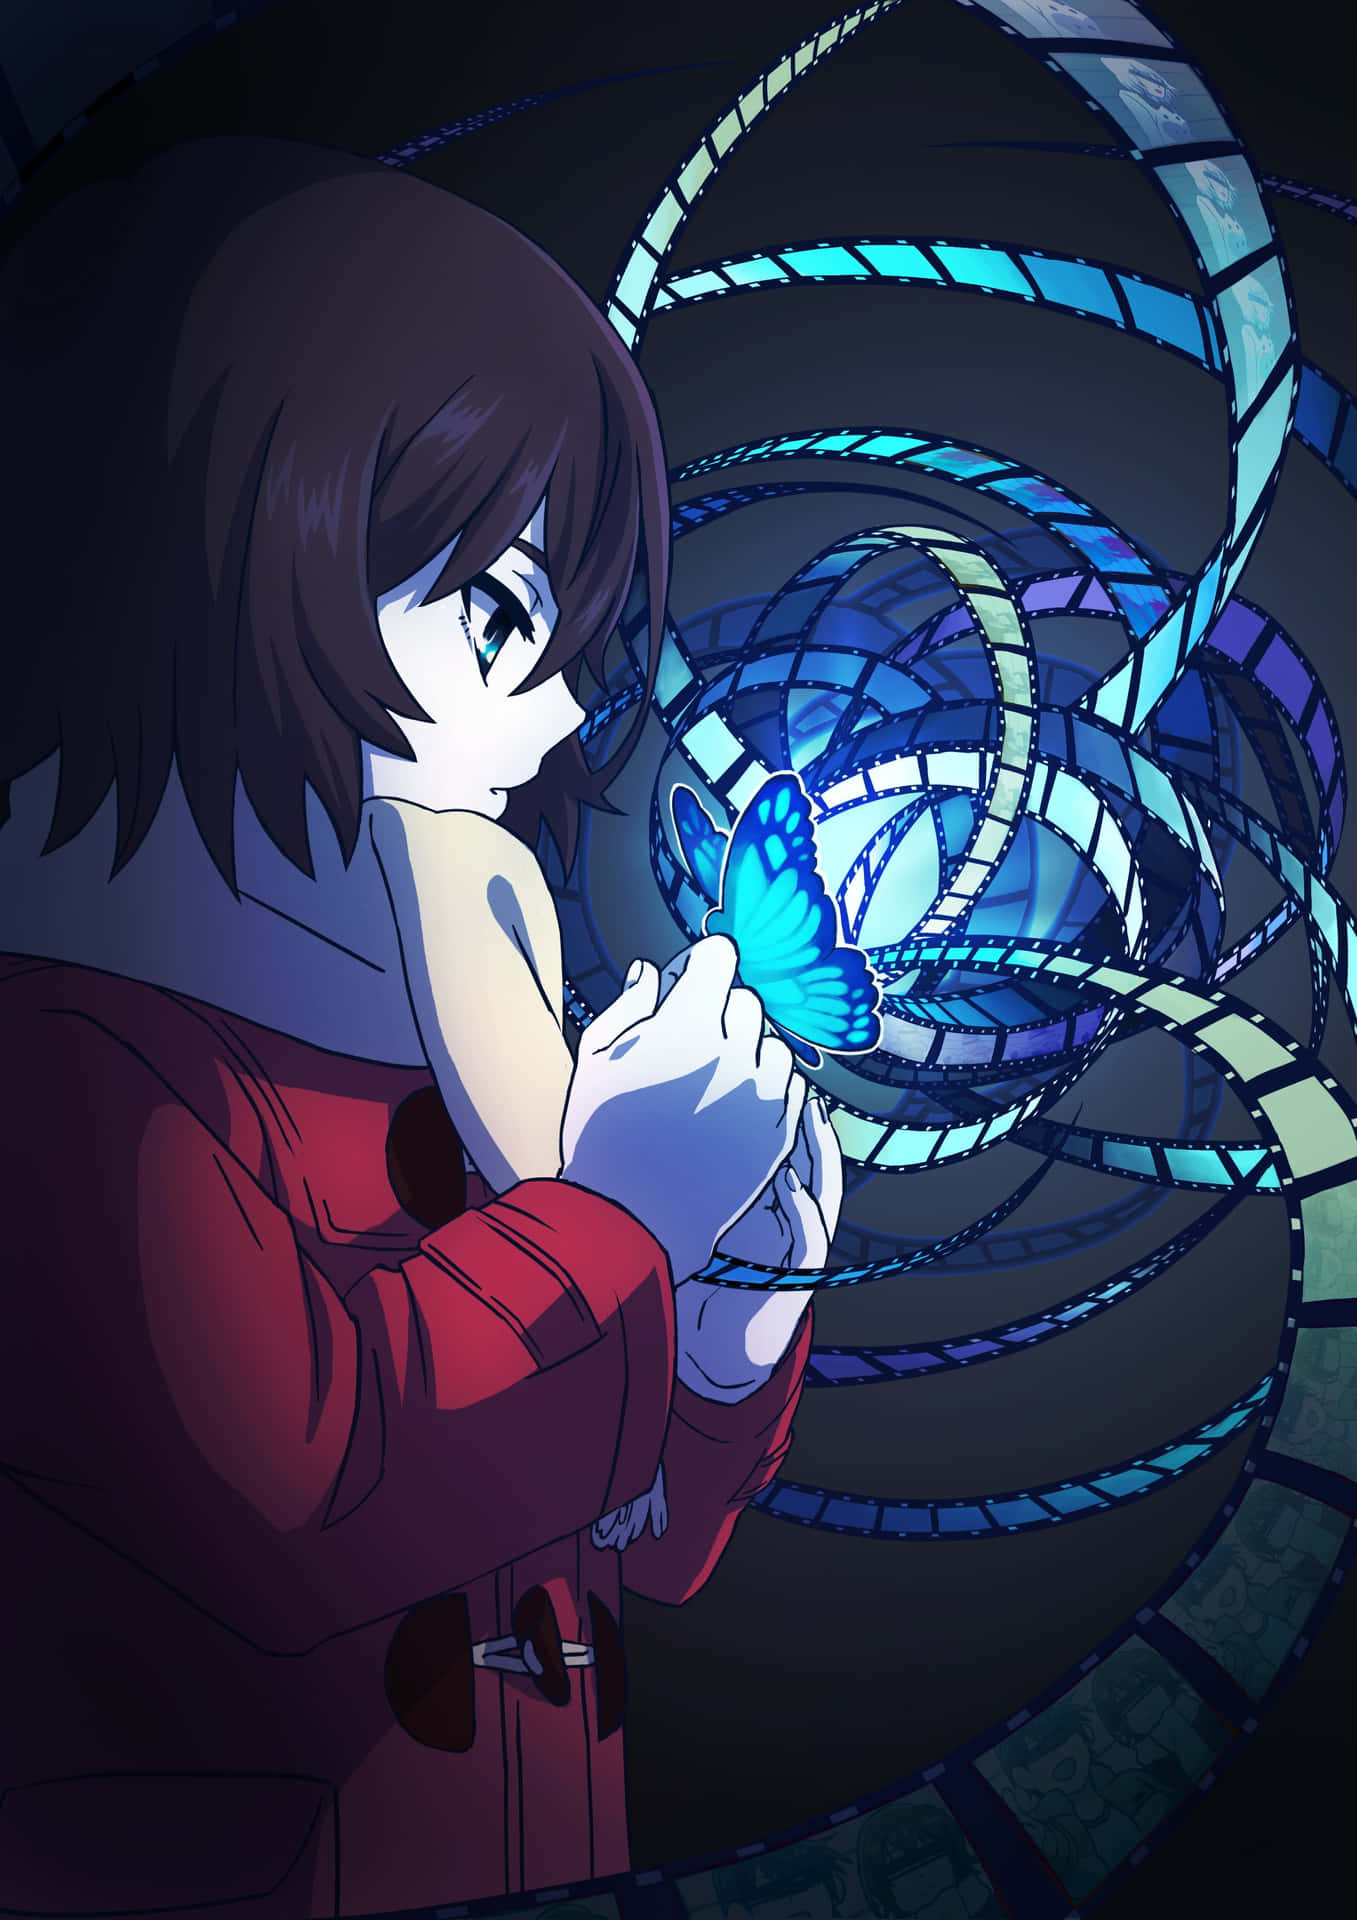 A place of adventure and possibility, follow Satoru on his journey in 'Erased'.